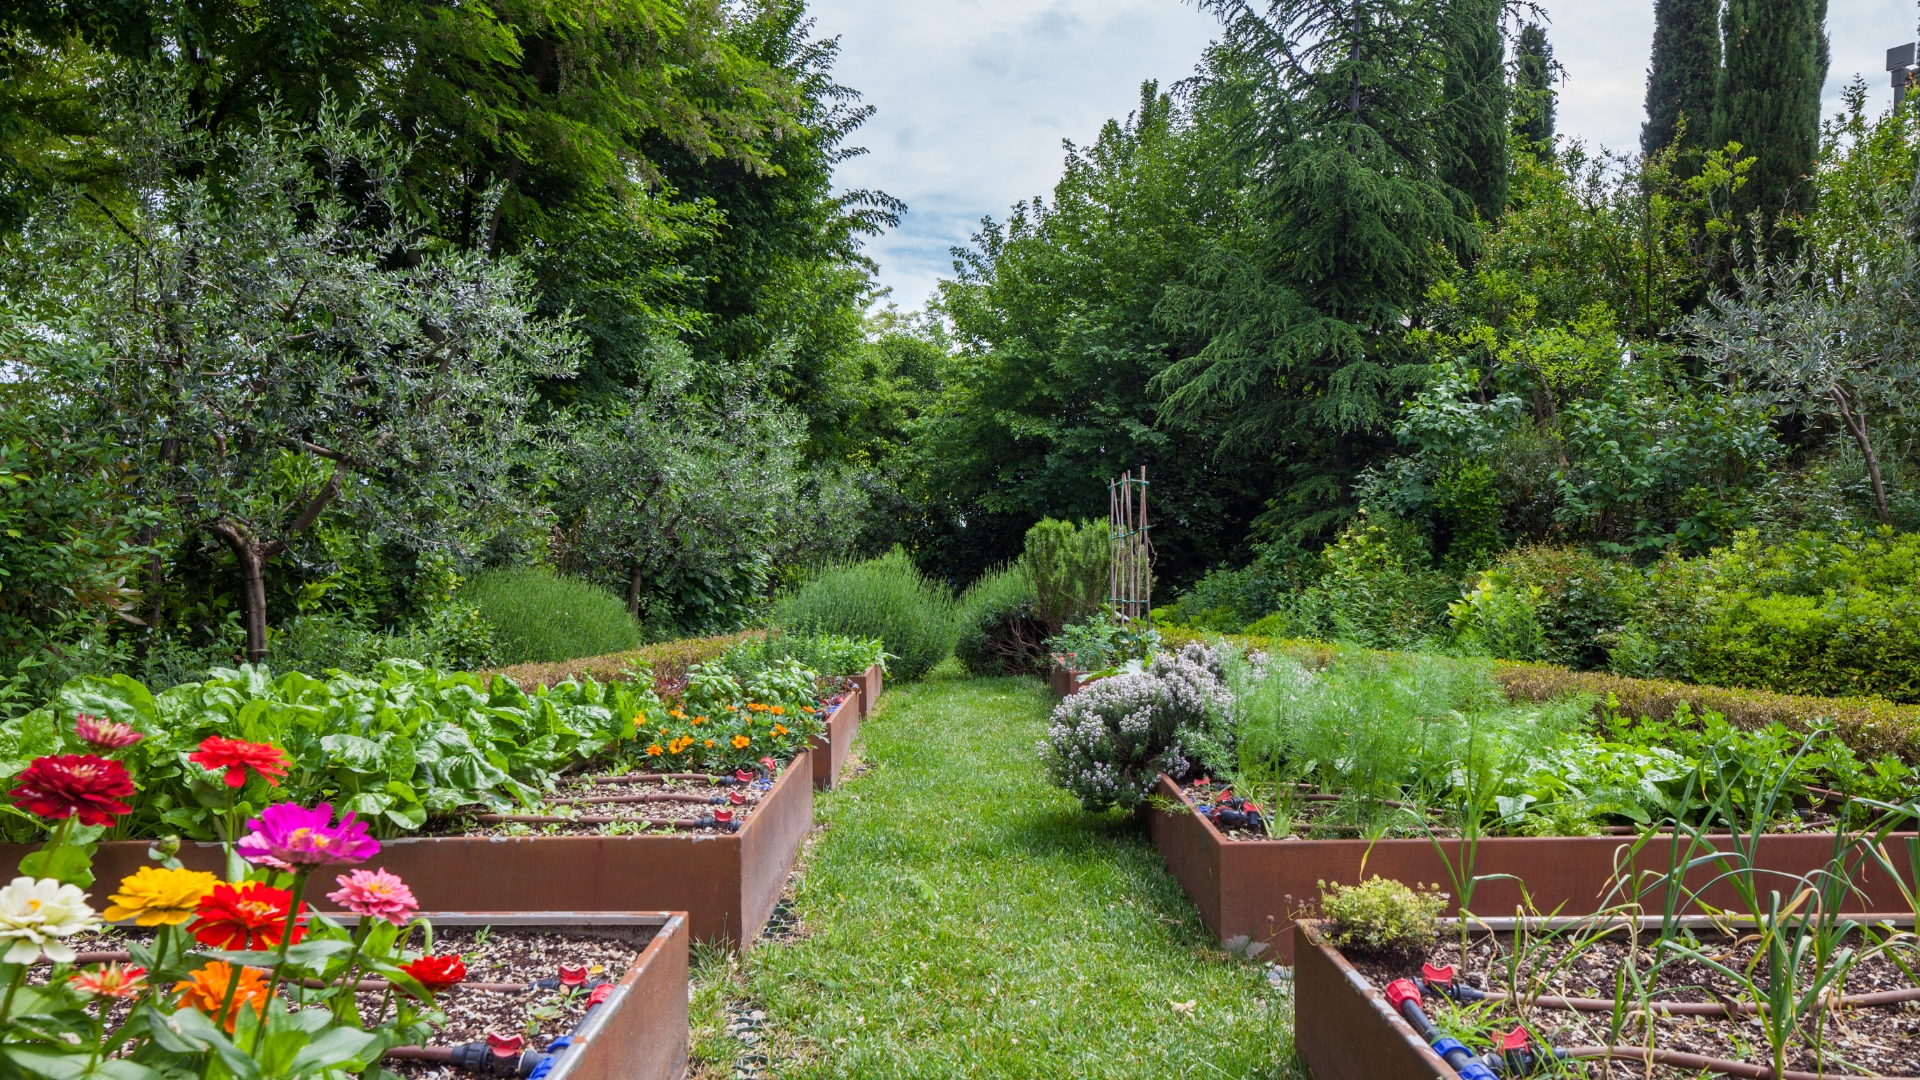 Gardening Guide: Growing Patience And The Benefits Of Planning Your Garden